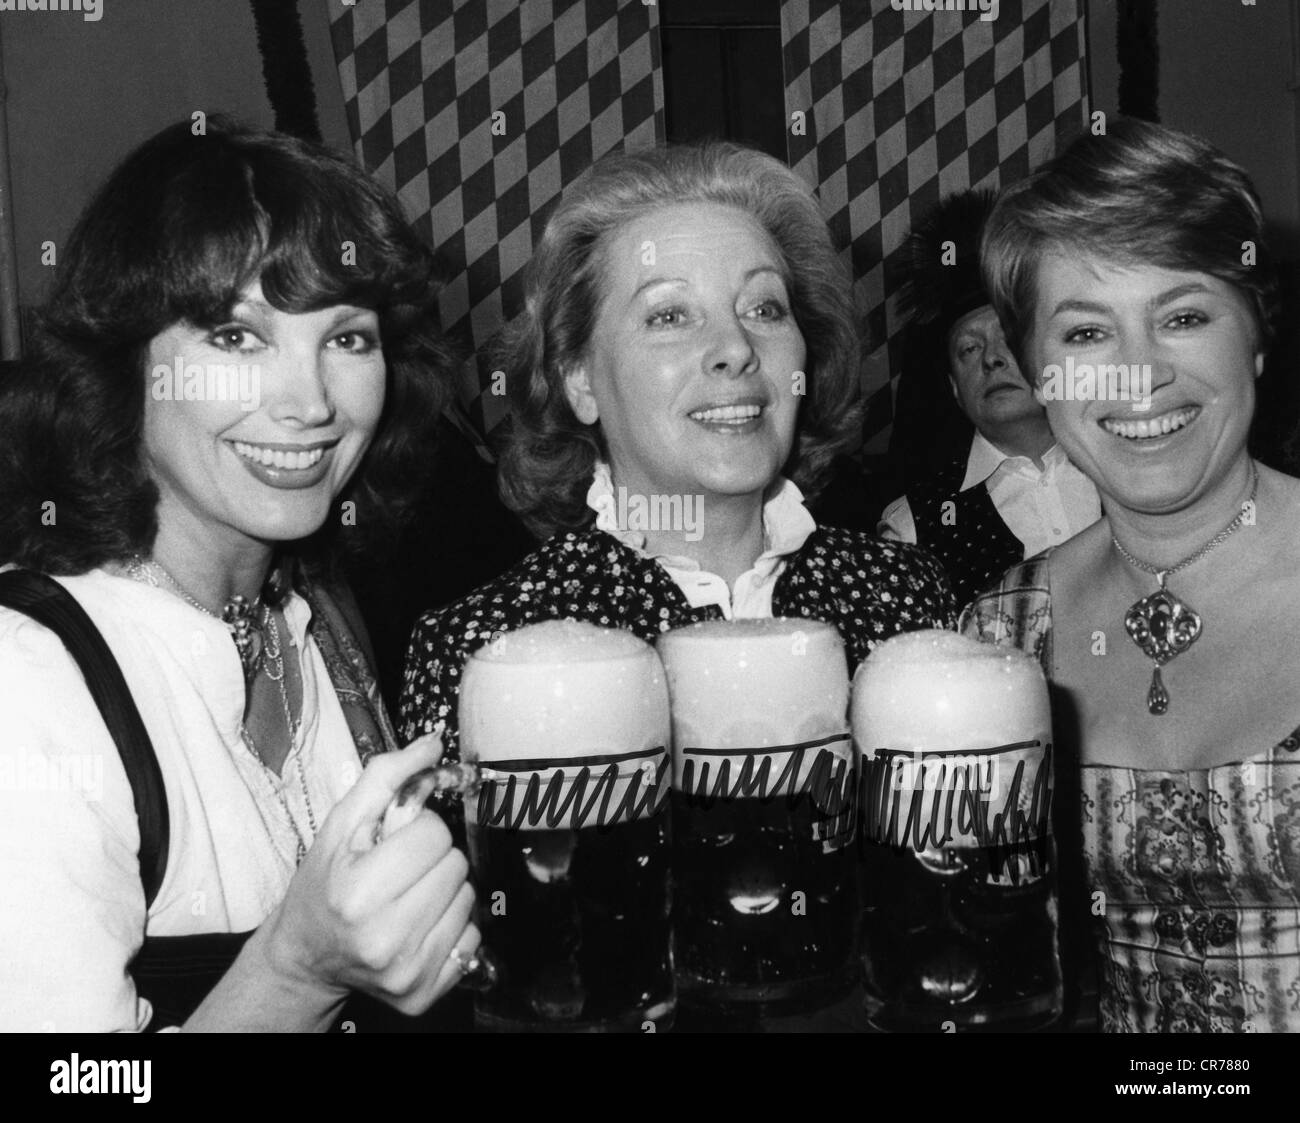 Schuermann, Petra, 15.9.1935 - 13.1.2010, German actress, TV presenter, group picture, with Ruth Kappelsberger and Anne-Marie Sprotte, at a beer festival in Munich, March 1981, Stock Photo